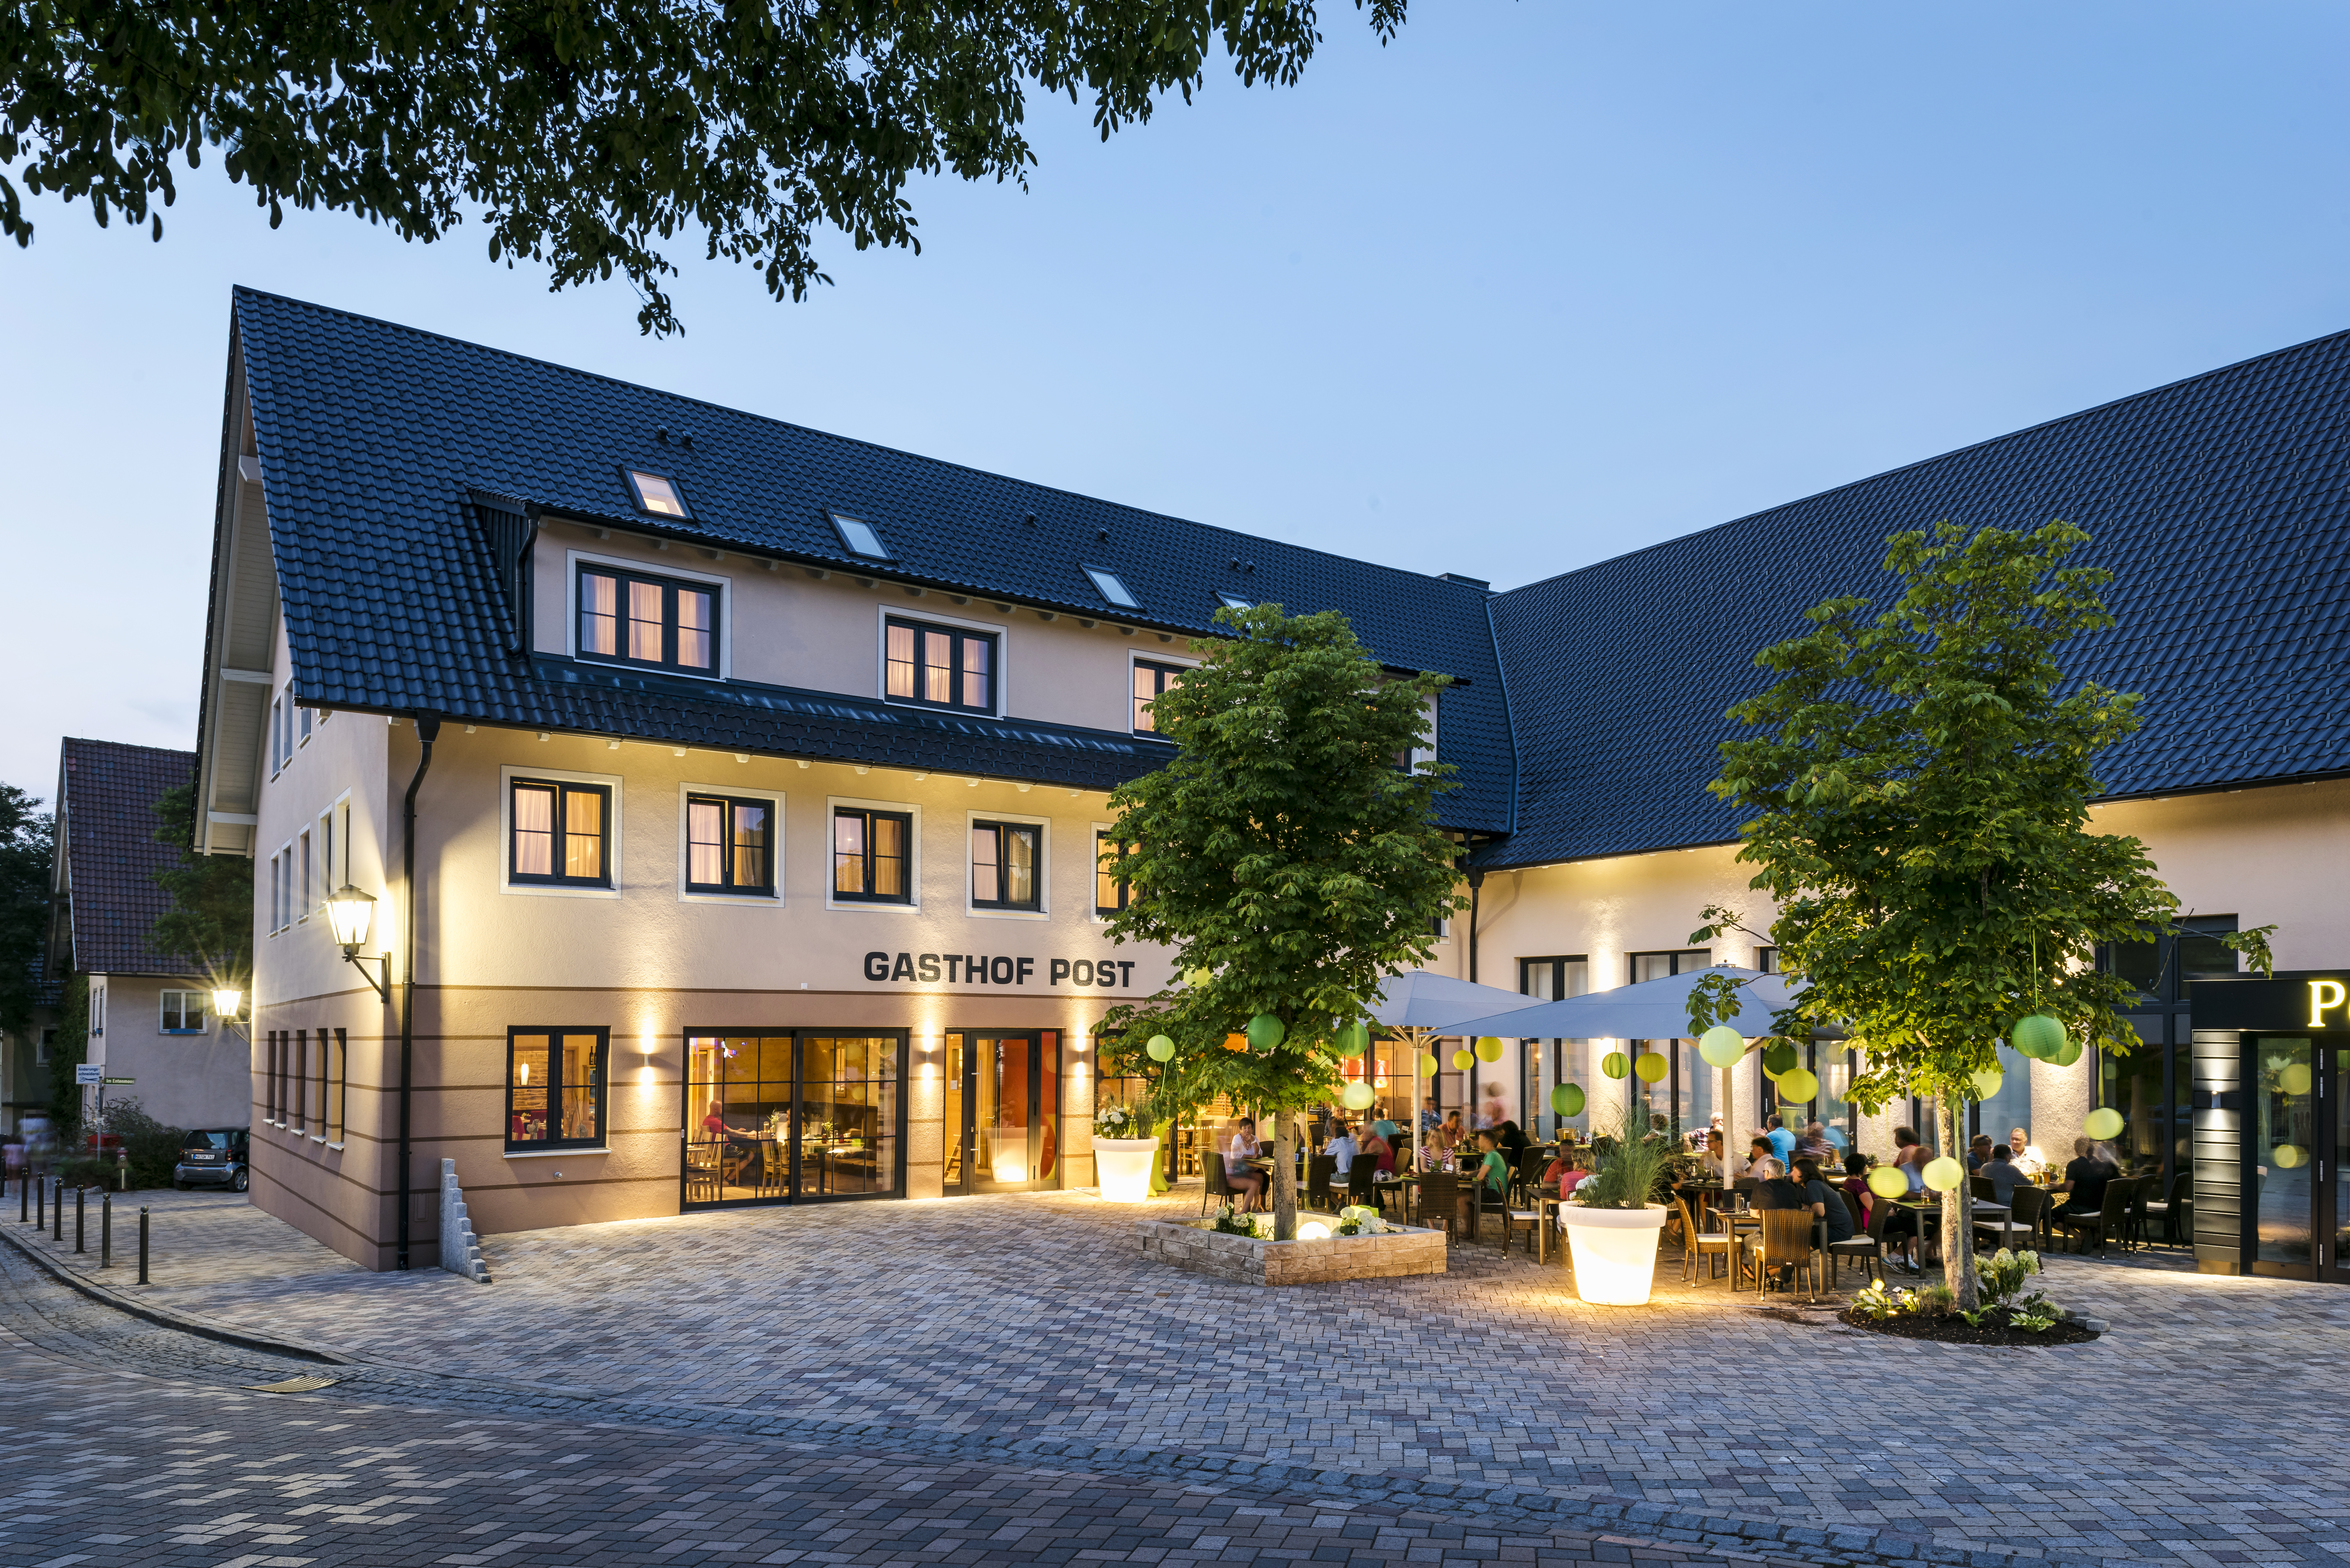 Die POST Hotel + Gasthof <br/>129.00 ew <br/> <a href='http://vakantieoplossing.nl/outpage/?id=e4aed42fb1c546144d59cea84836f8b7' target='_blank'>View Details</a>